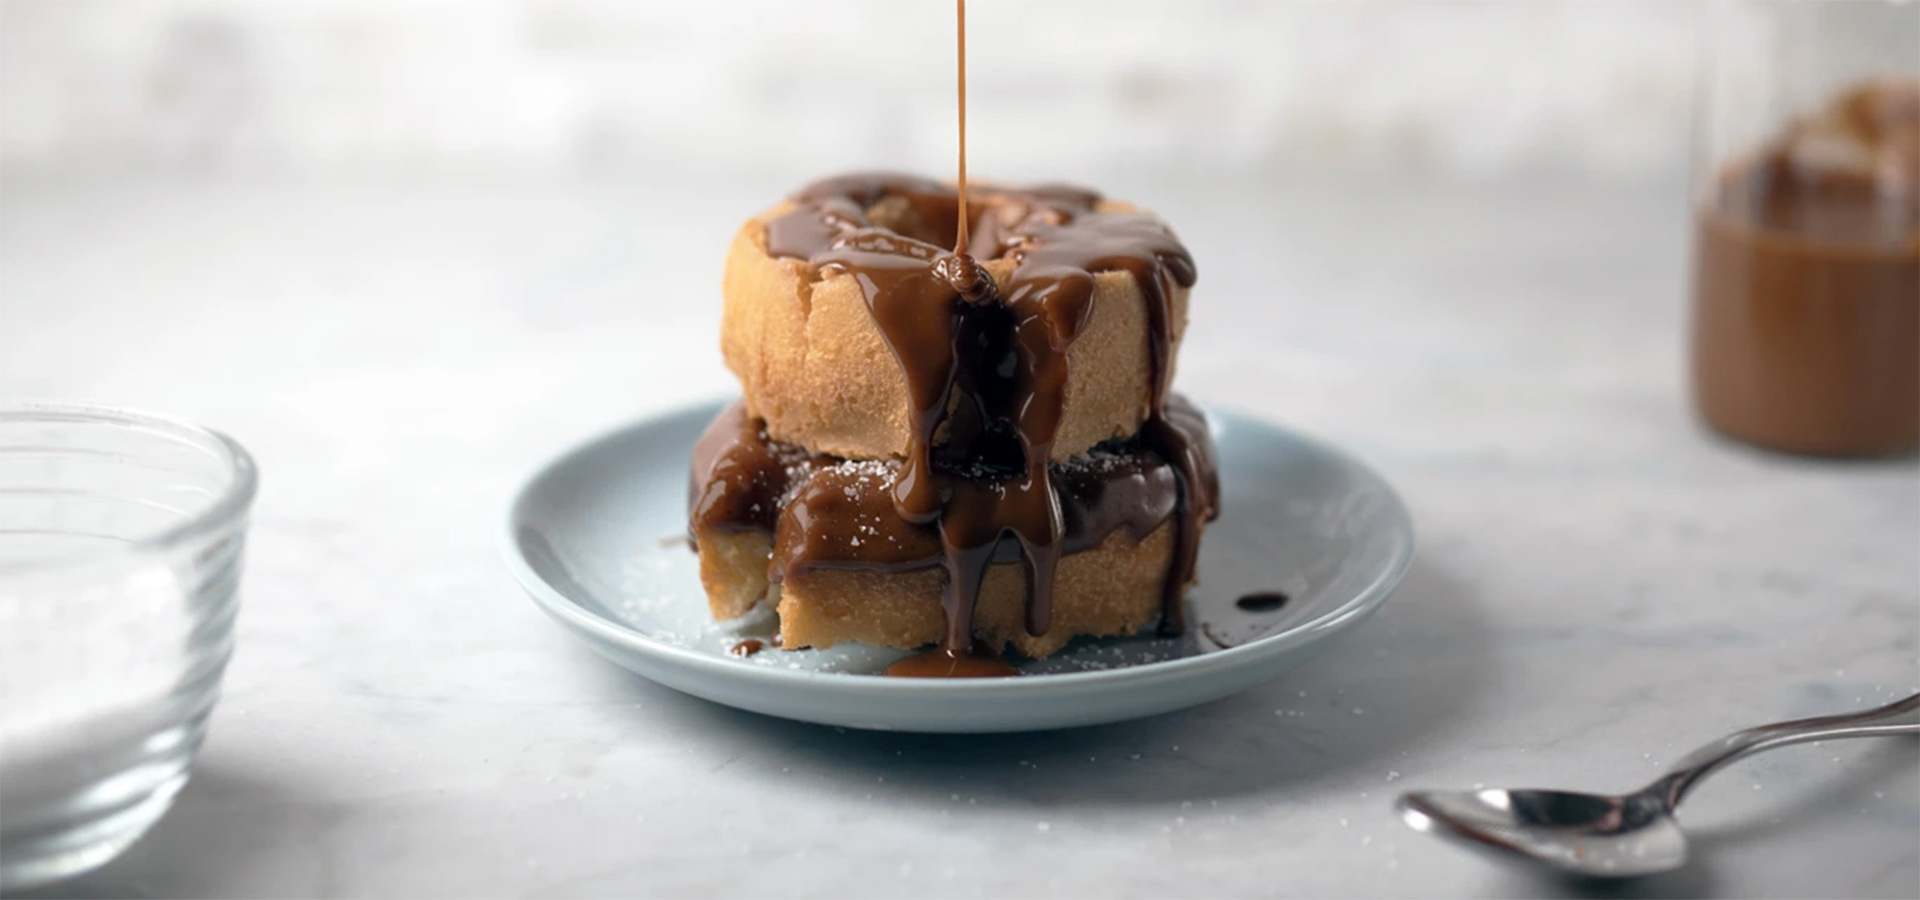 Image of doughnut drizzled with sauce